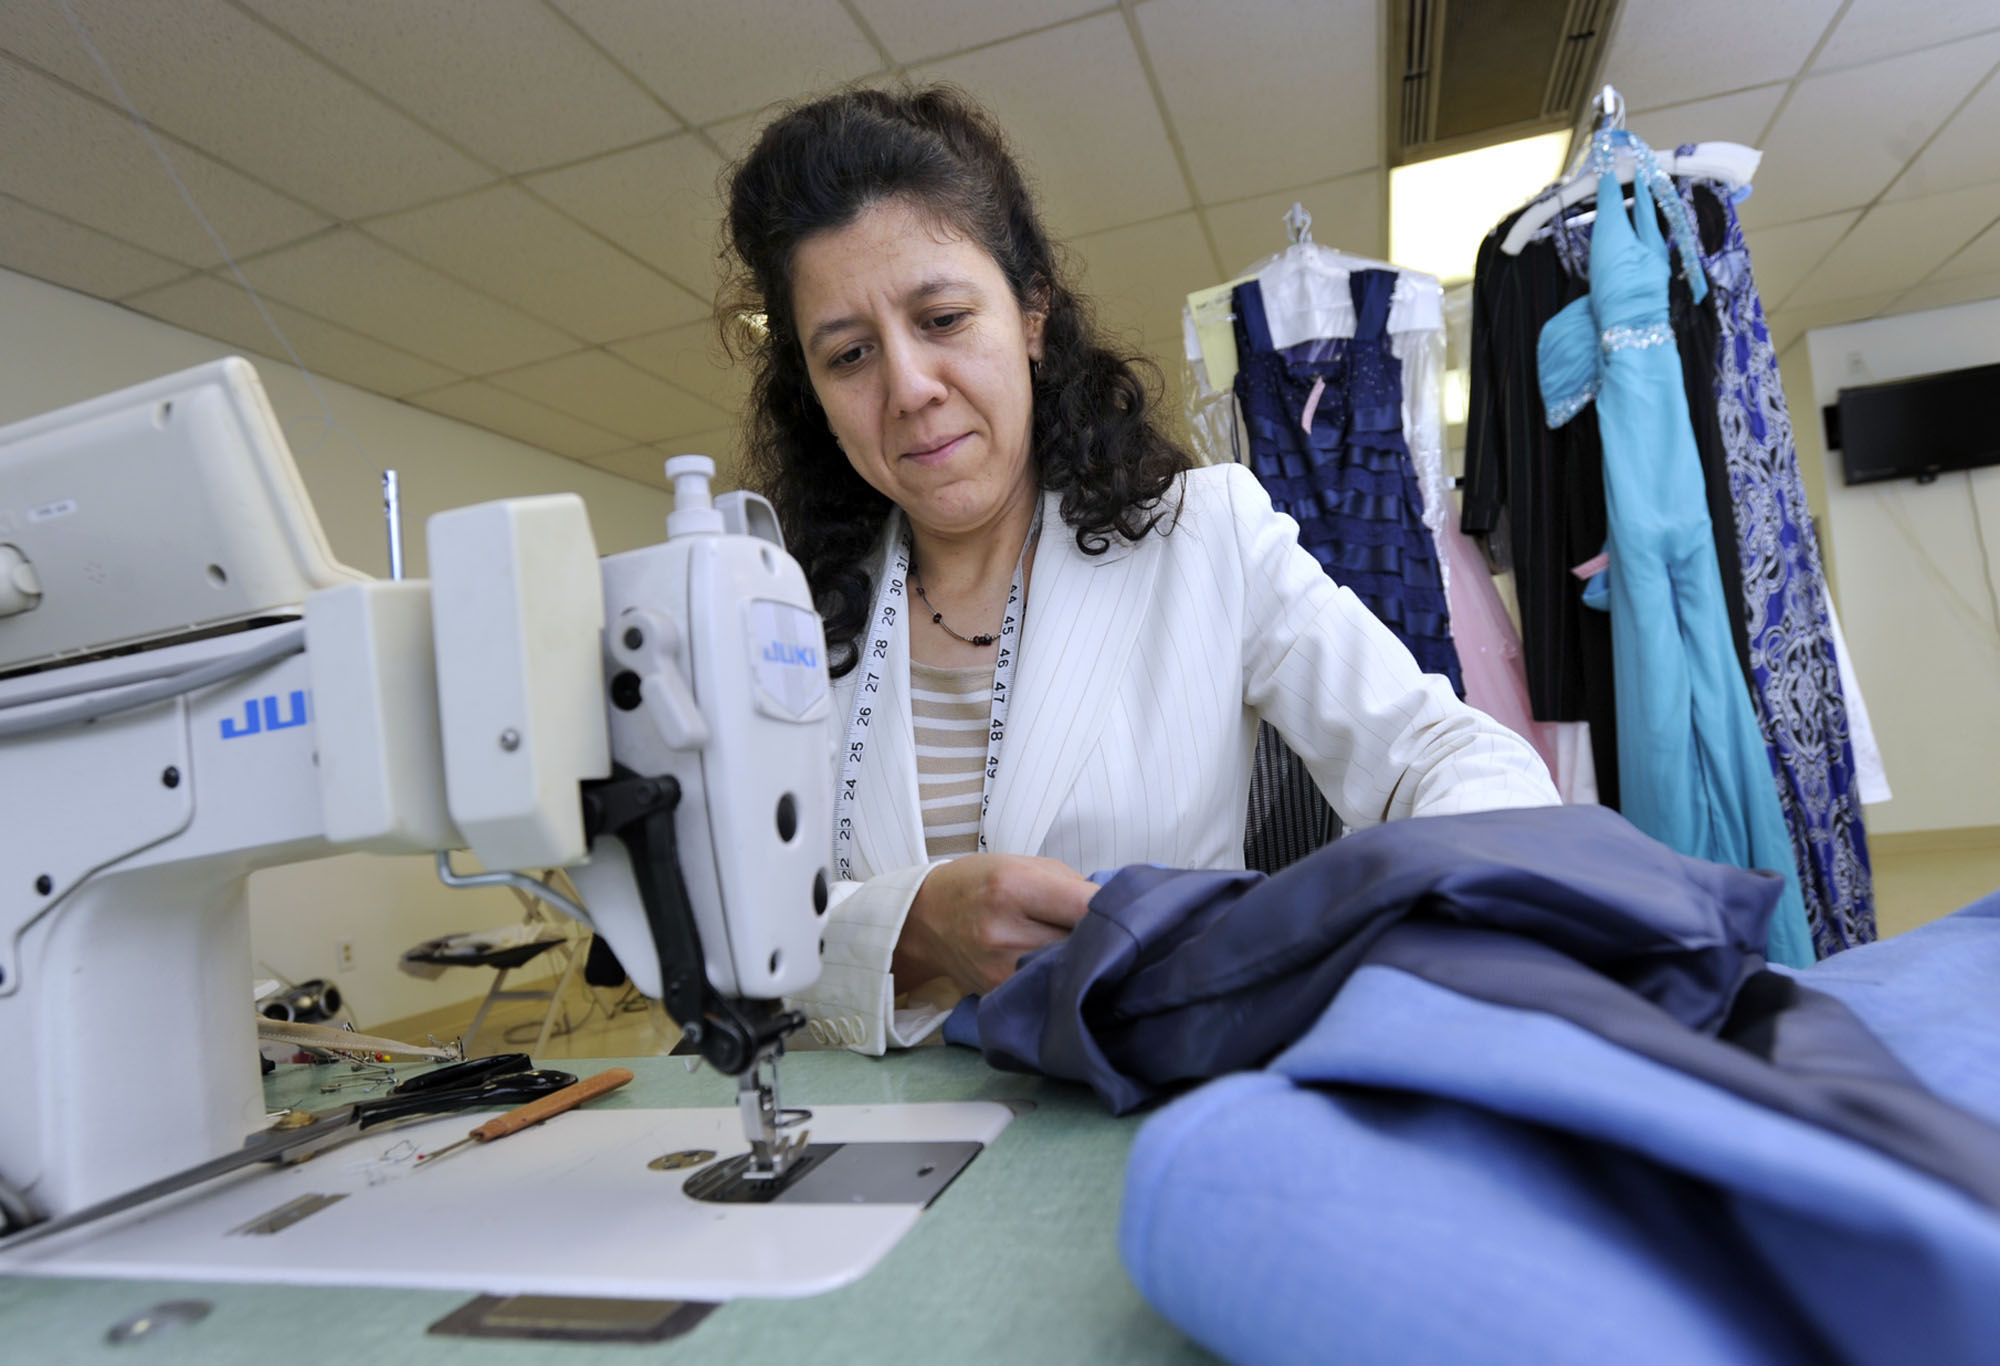 New shop offers tailoring and cleaning